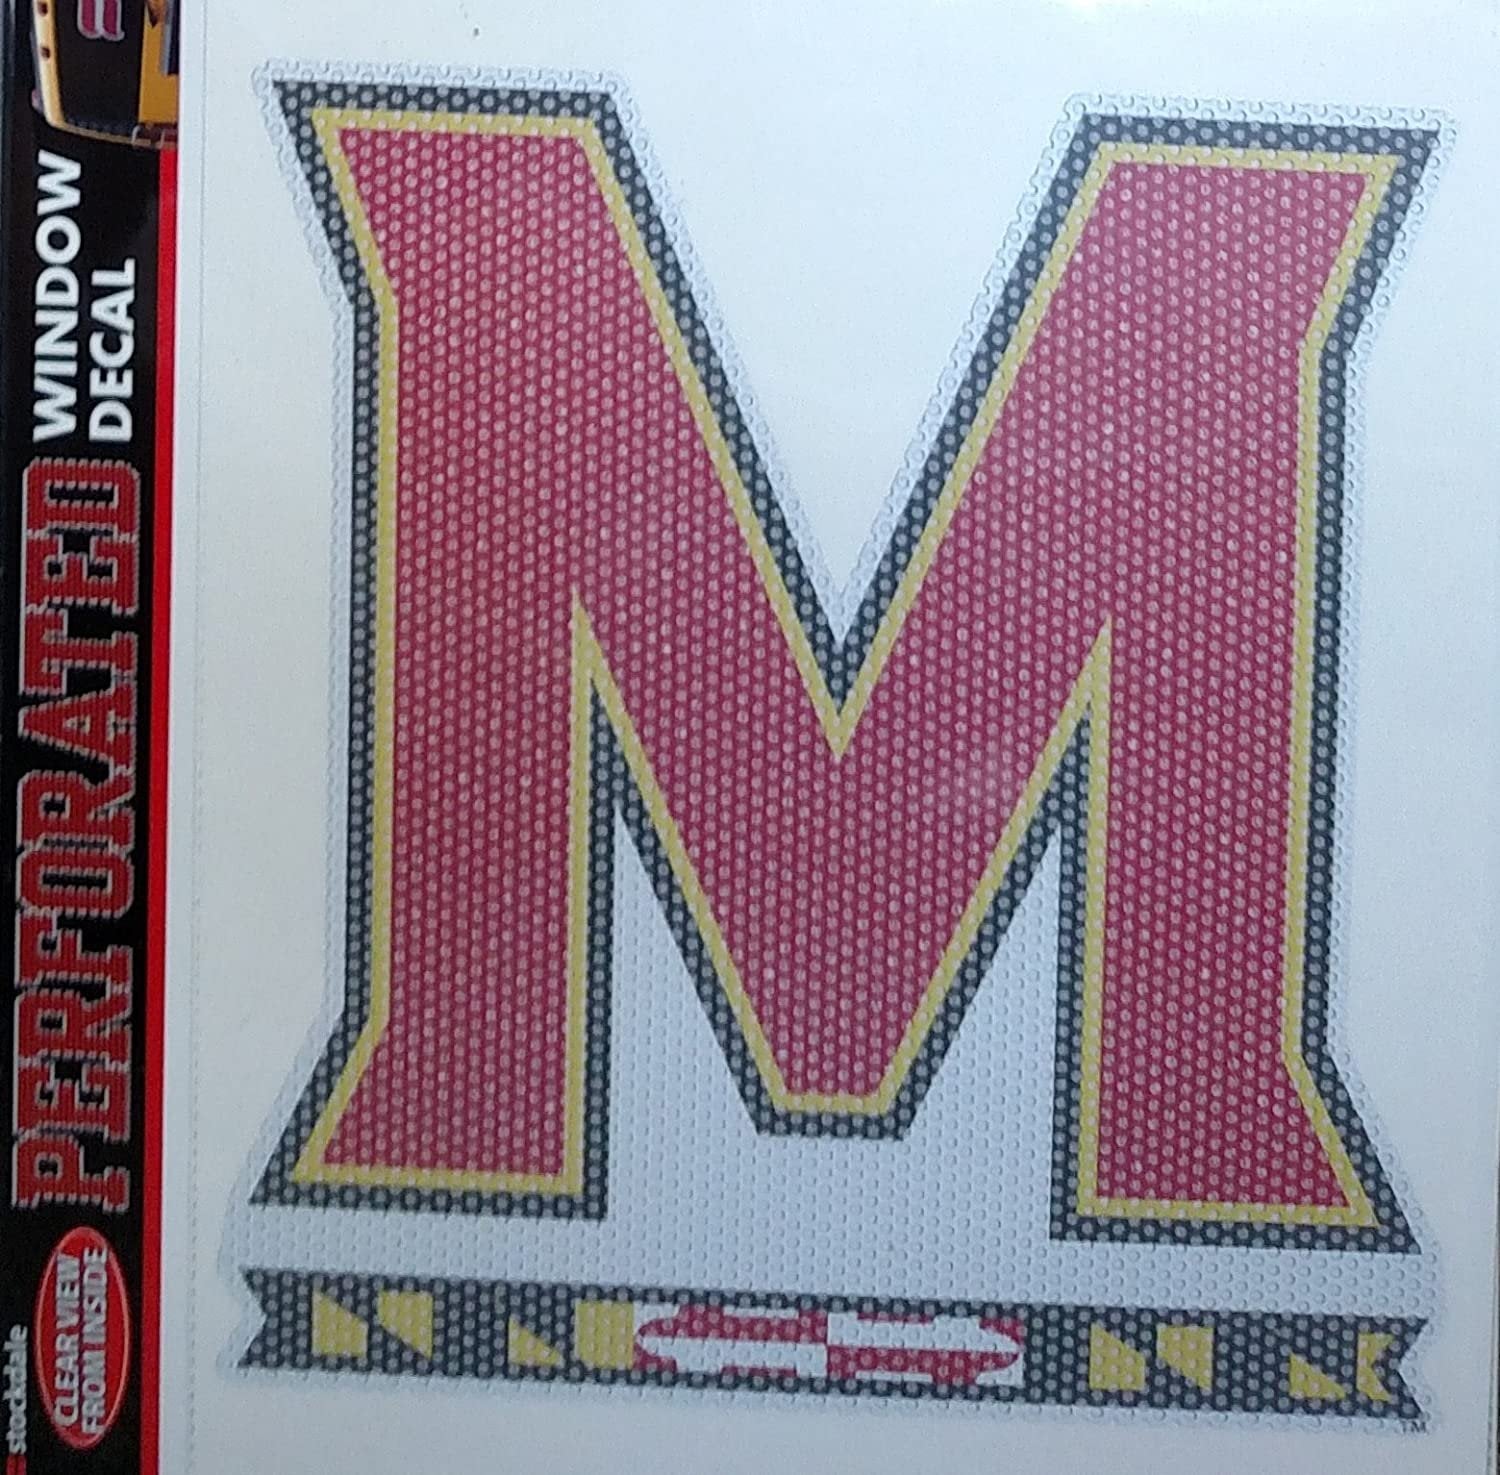 University of Maryland Terrapins 8 Inch Preforated Window Film Decal Sticker, One-Way Vision, Adhesive Backing